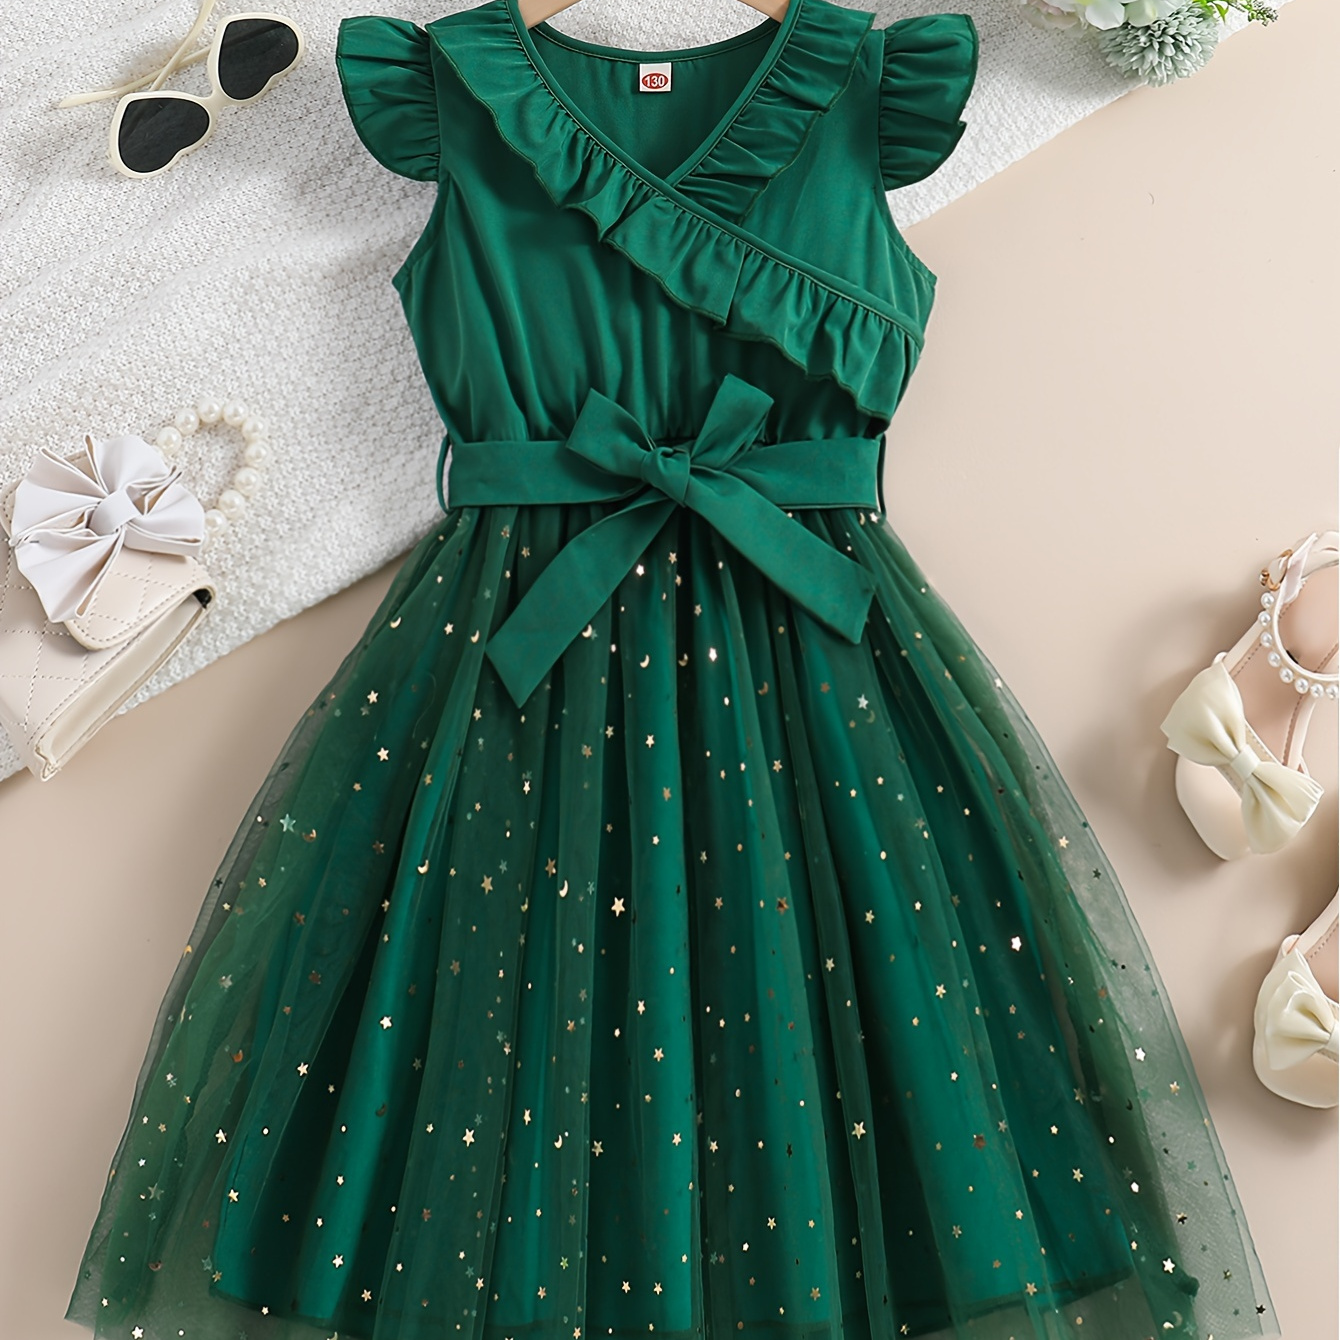 

Girls' Elegant V-neck Sleeveless Dress With Ruffle Design And Starry Tulle Overlay, Casual Summer Outfit With Belt For Youth - Green